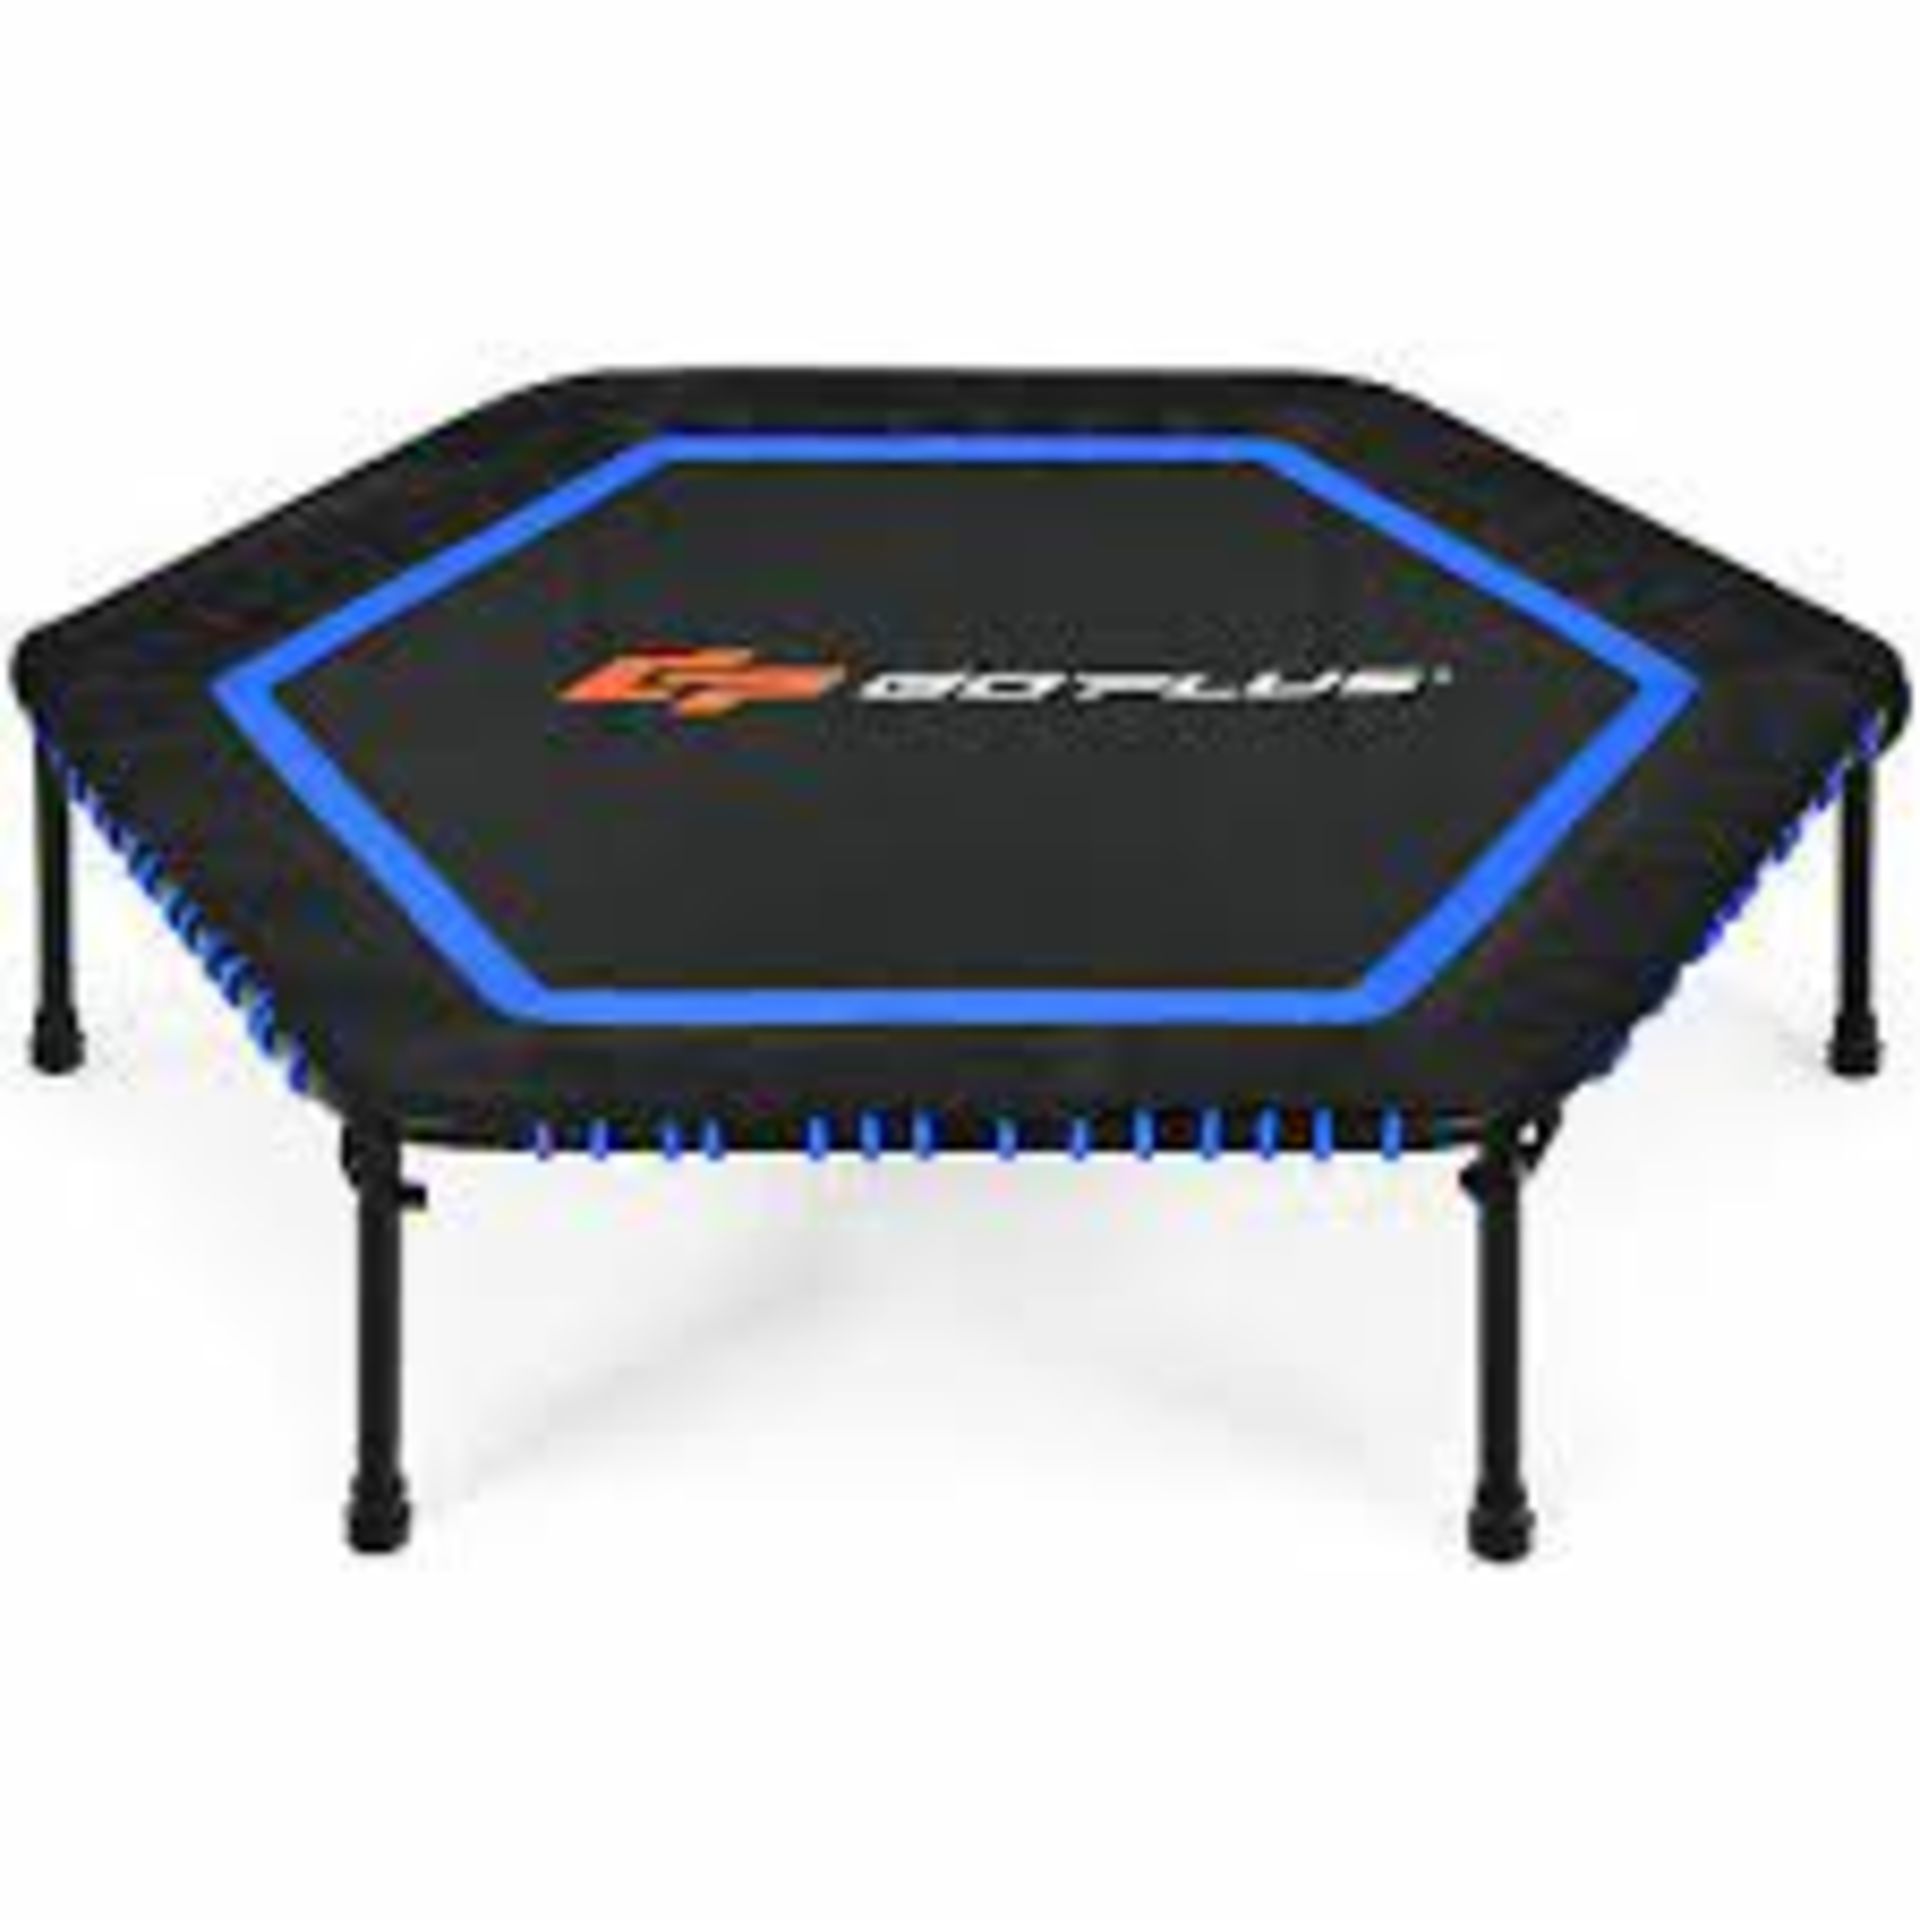 50" Fitness Trampoline Gym Exercise Jumping Bed Foldable Rebouncer Safety Pads. - PW.